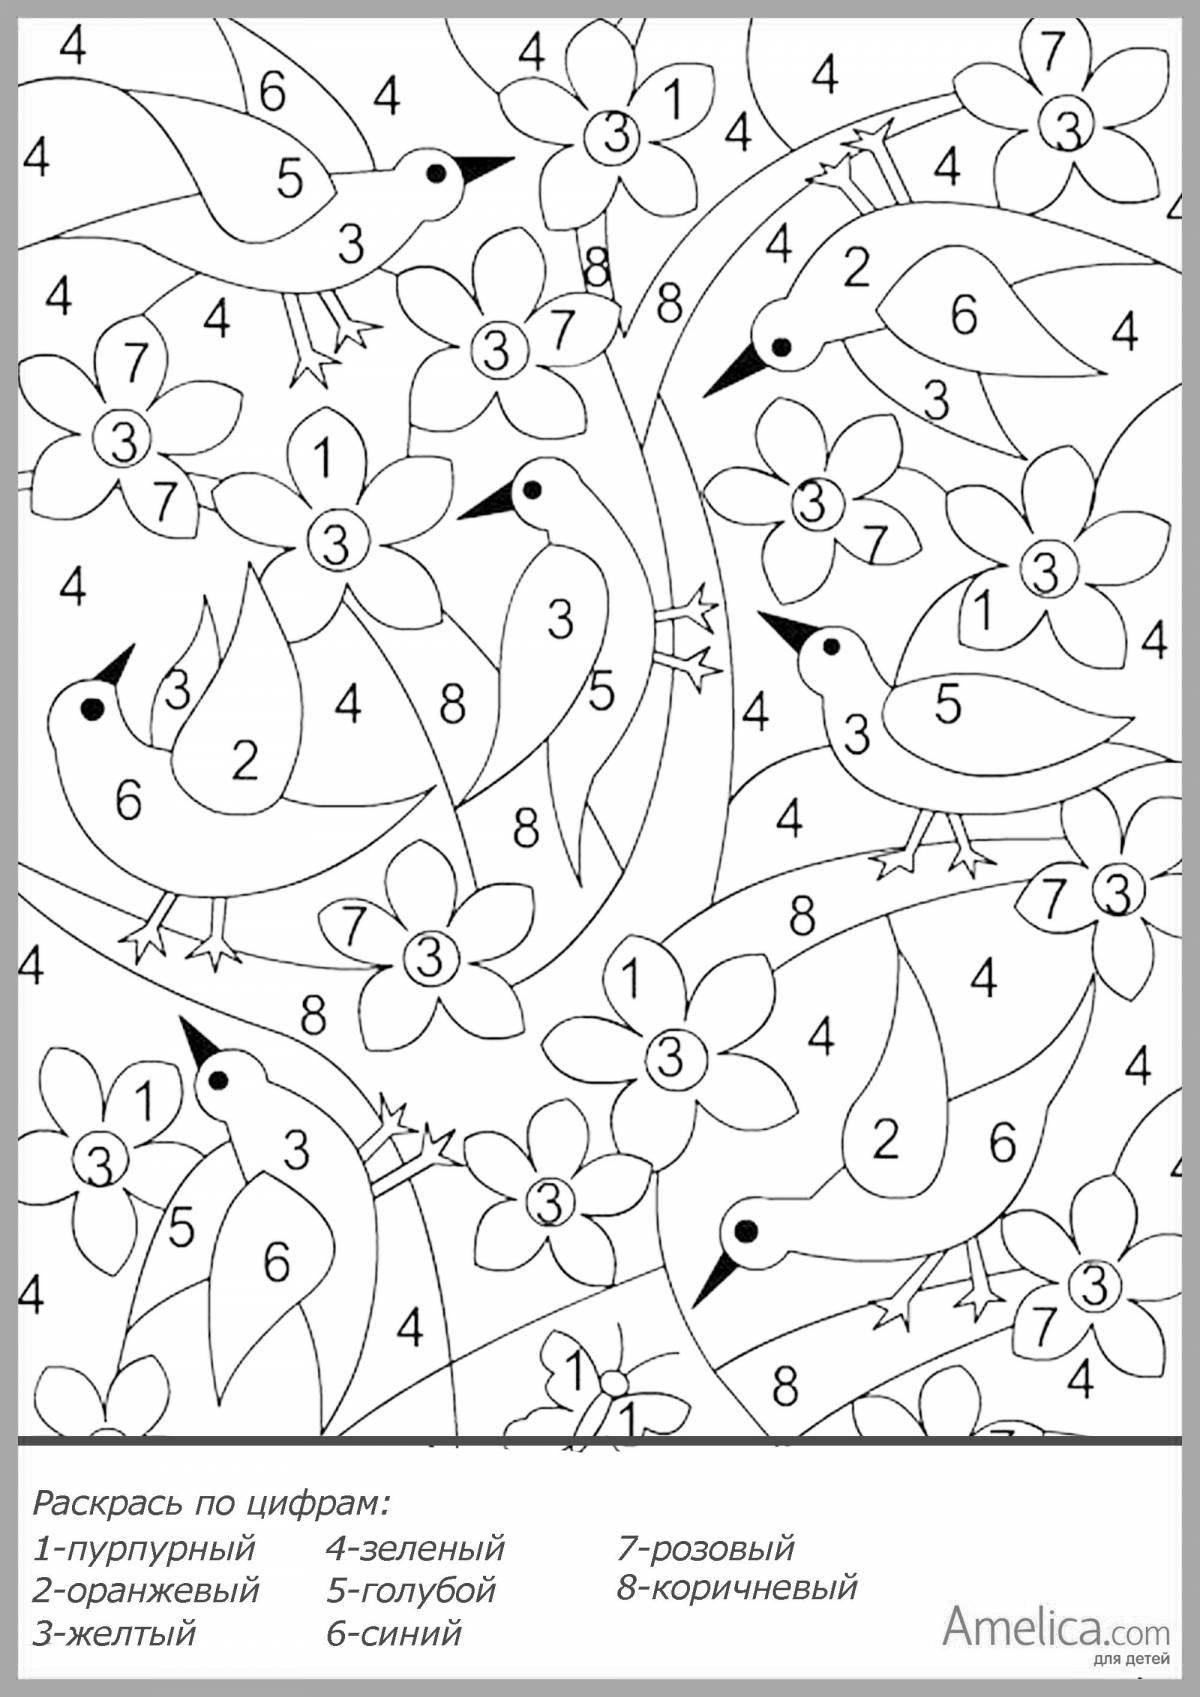 Coloring book for children 5-7 years old